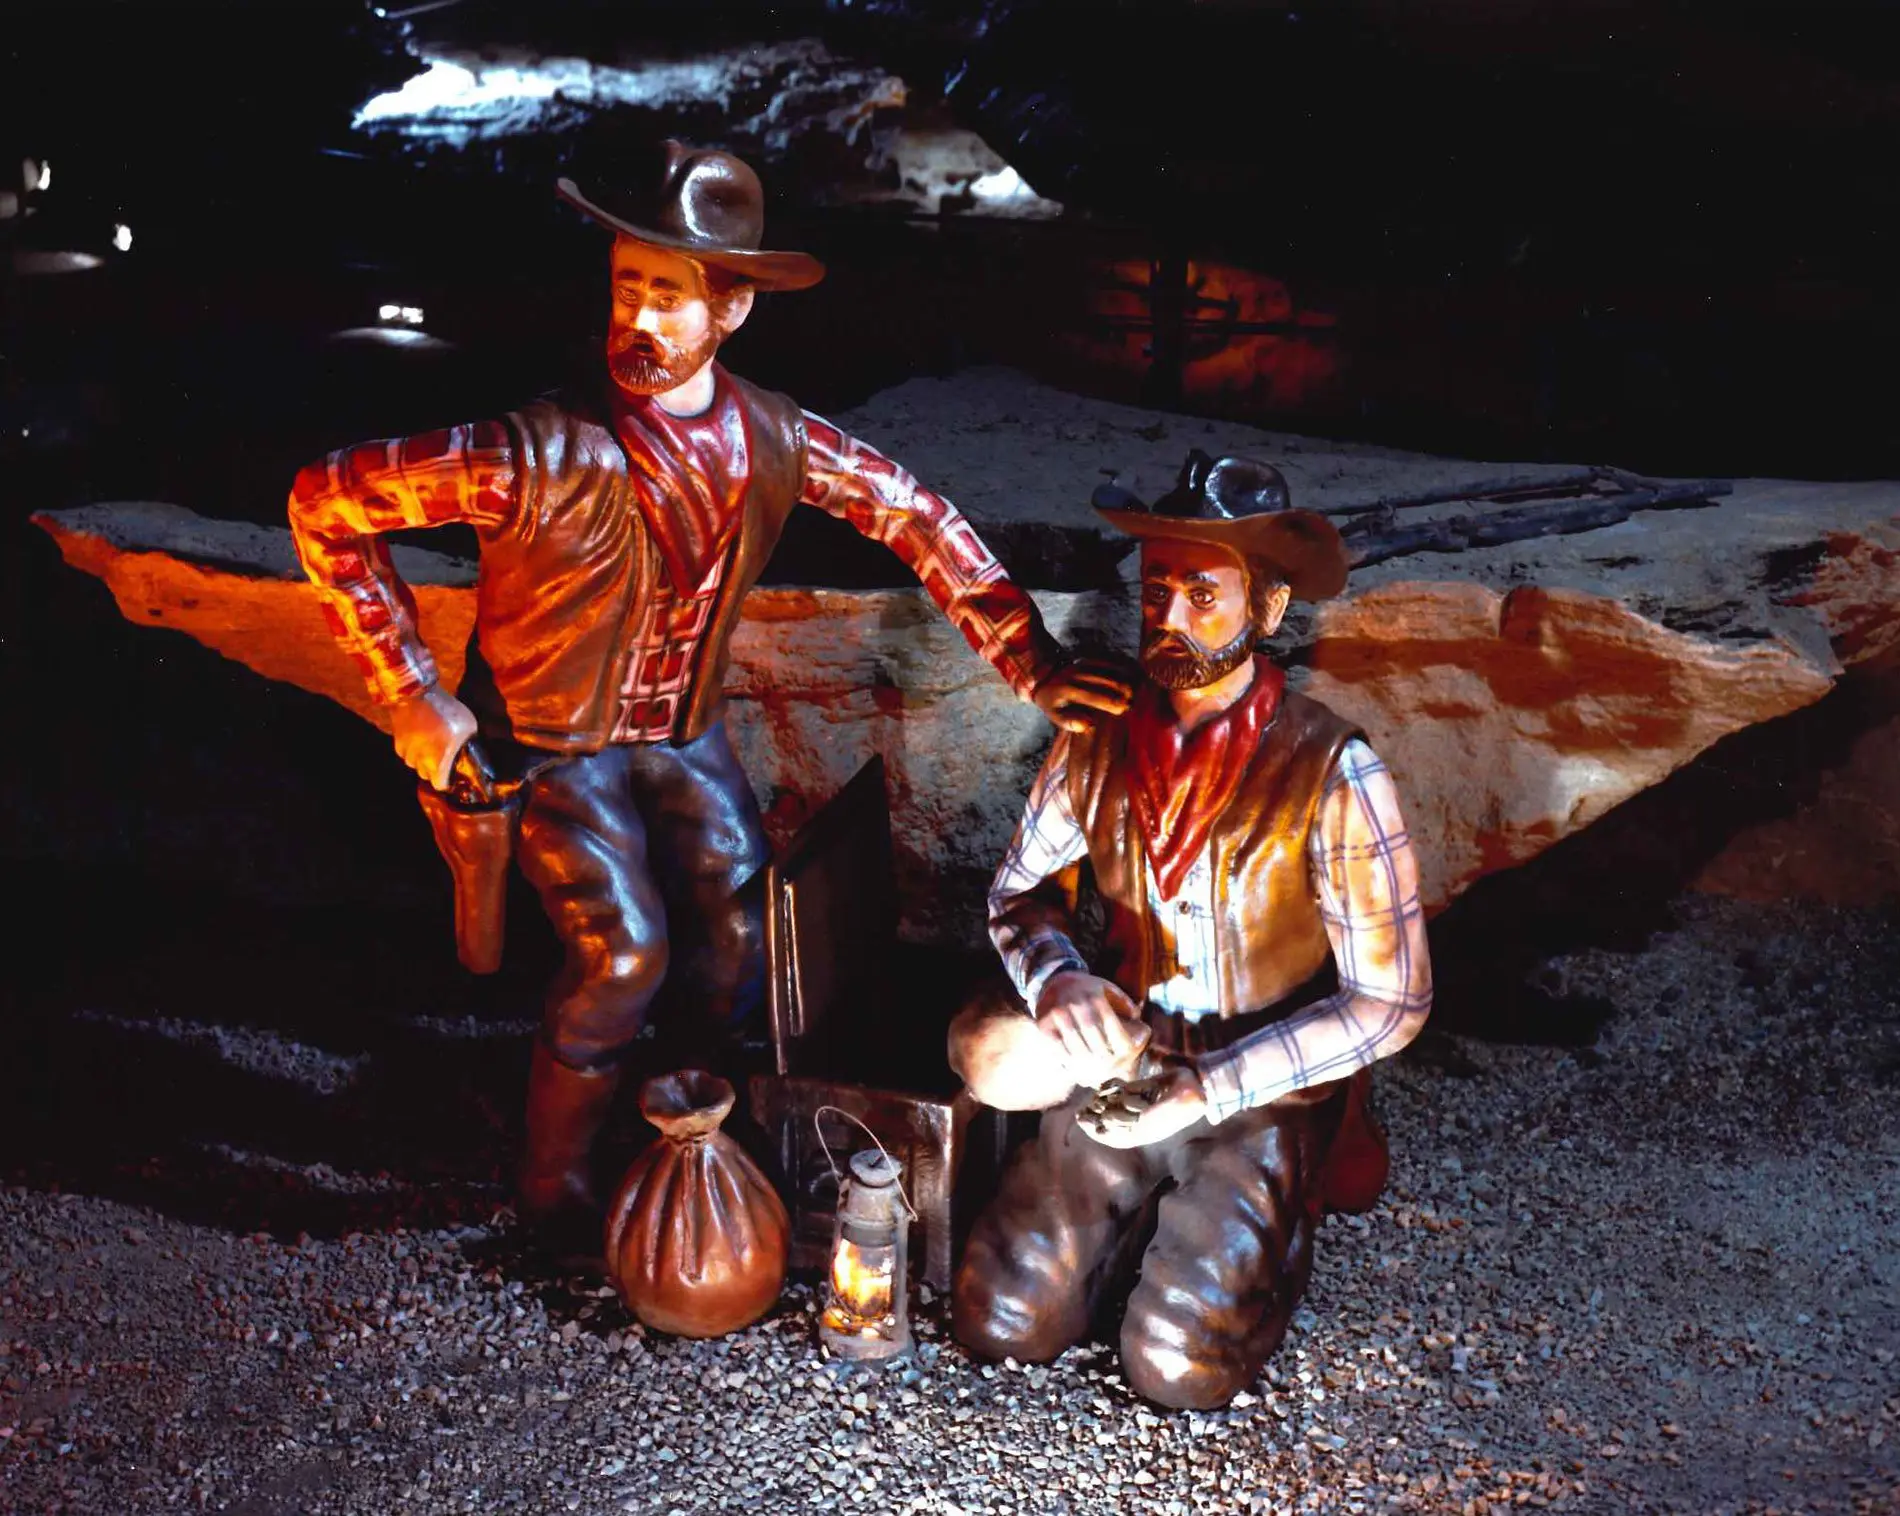 Sculpture of Jesse James and Frank James and their loot from a bank robbery